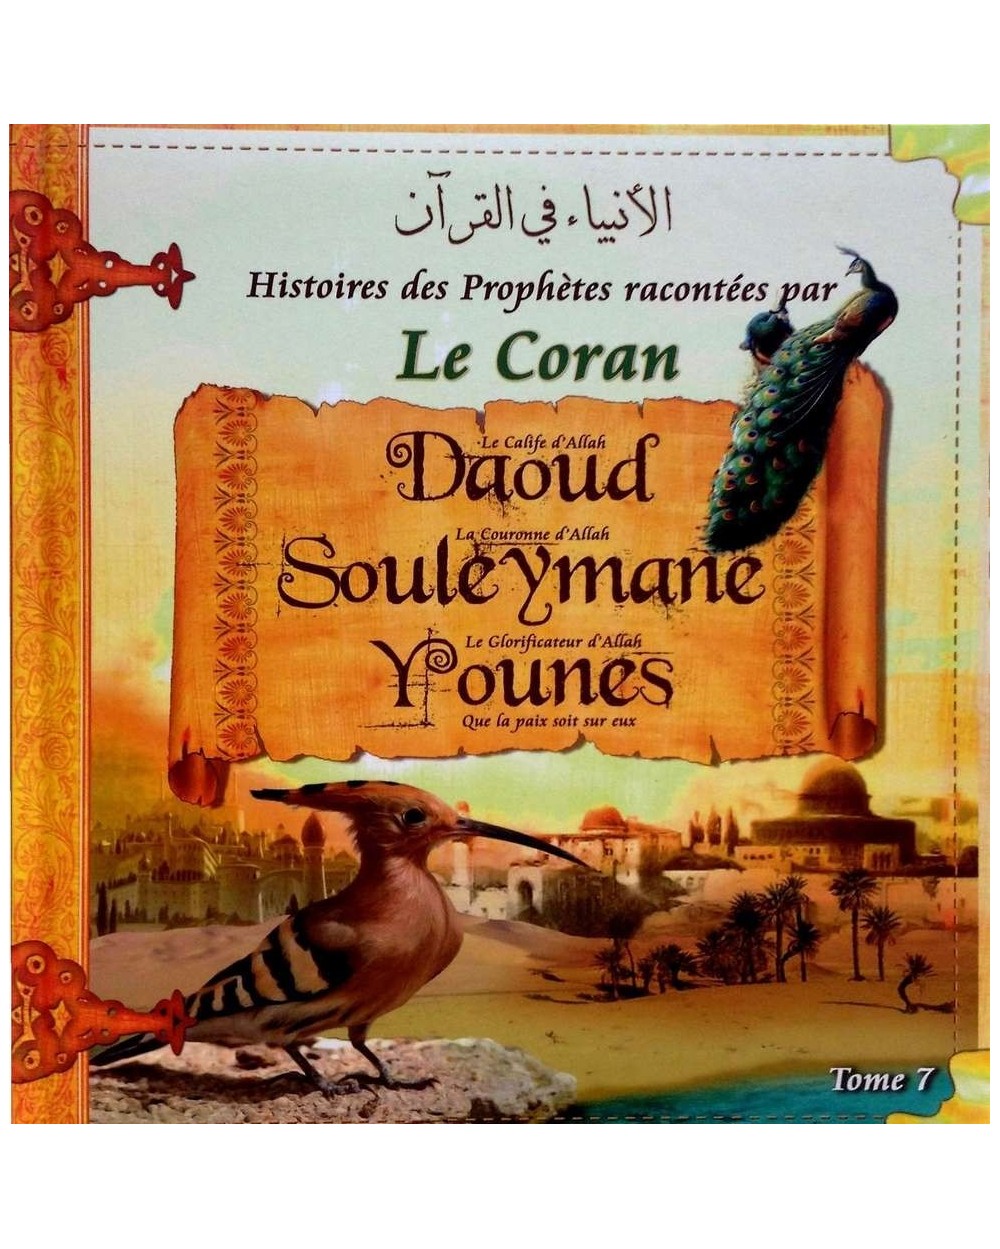 Stories of the prophets told by the Koran - Volume 7 (DAOUD, SOULEYMANE, YOUNES)